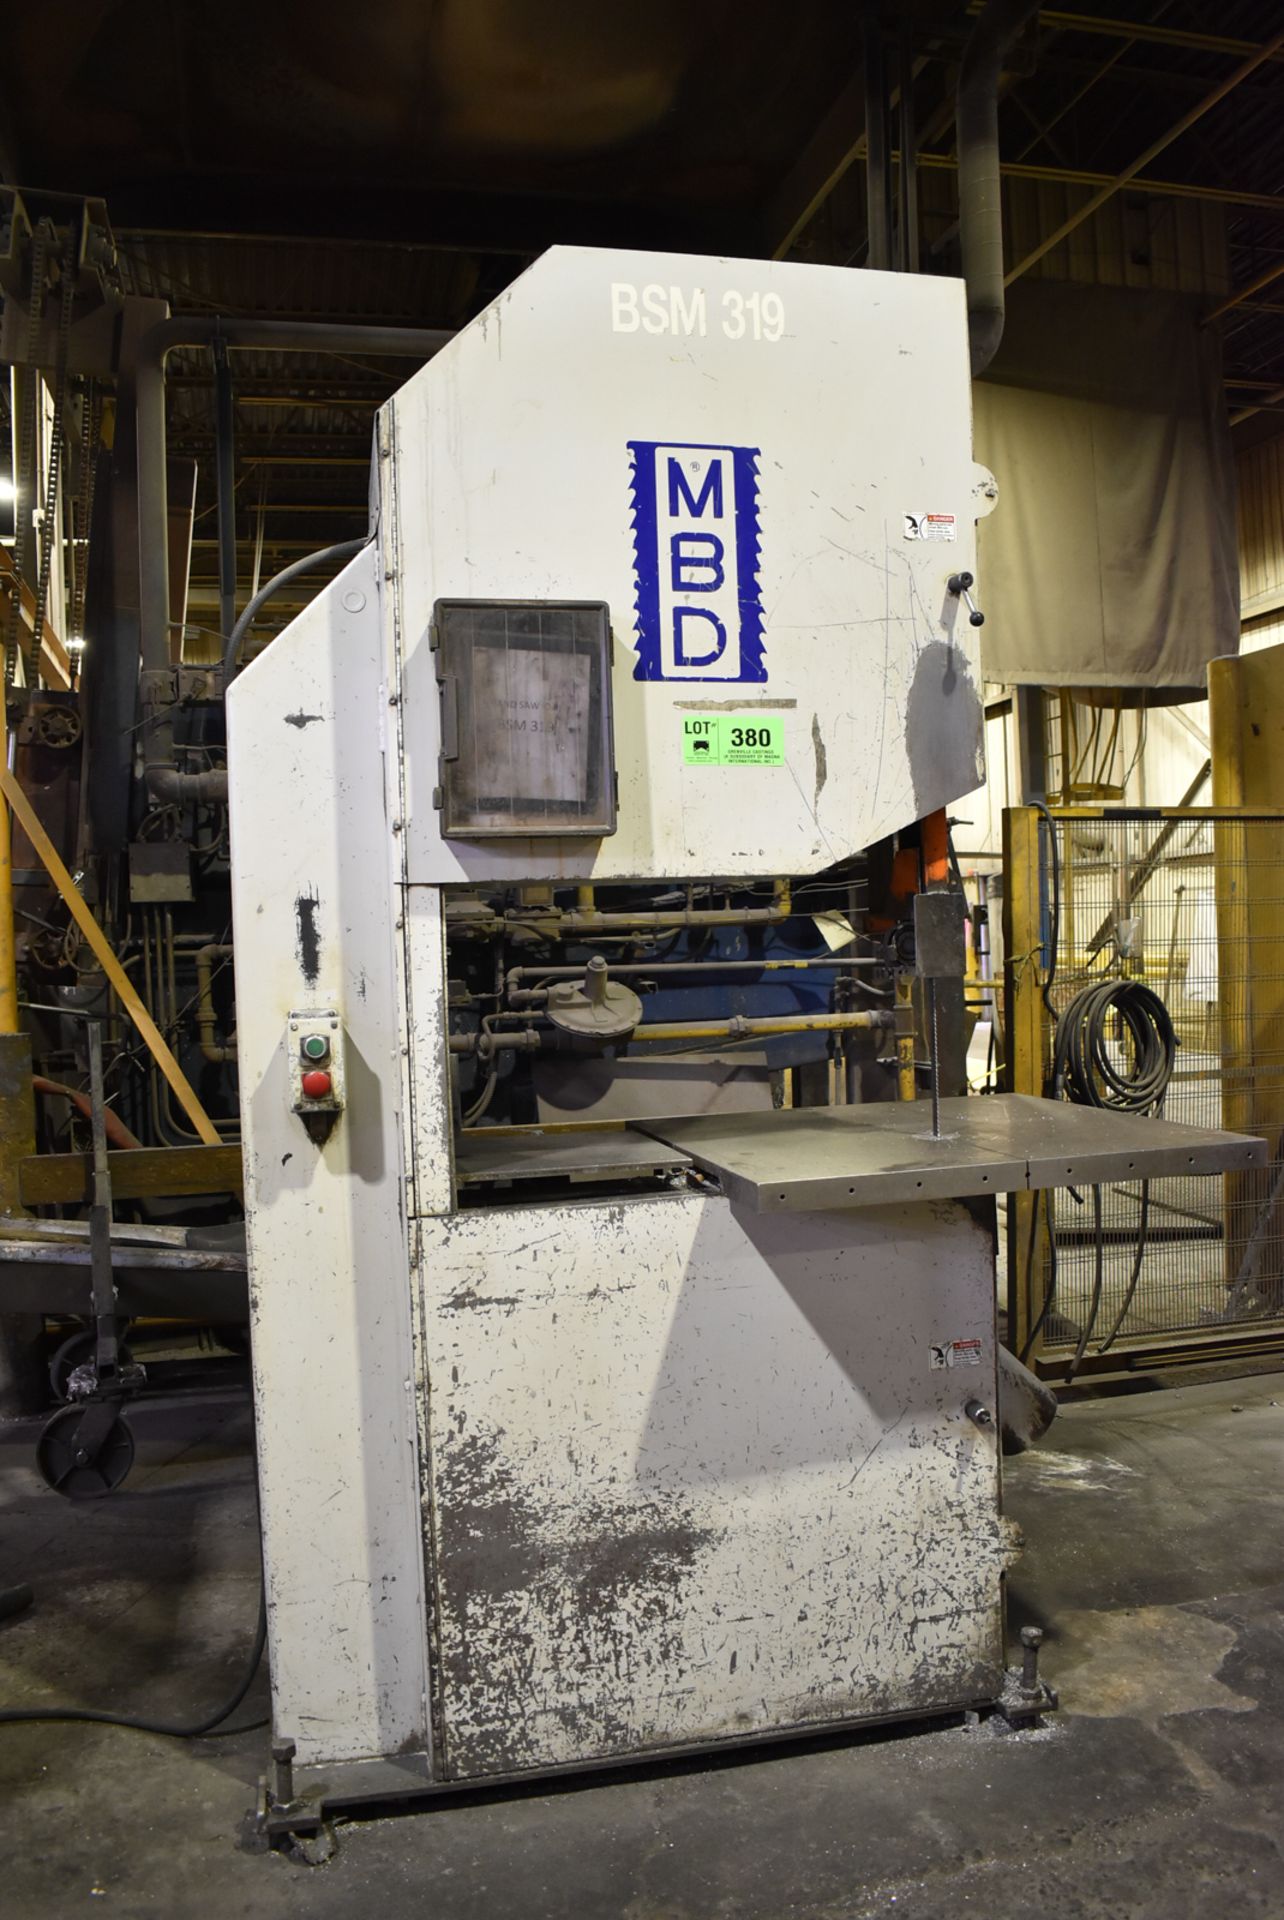 MBD BSM 319 HEAVY DUTY FLOOR TYPE VERTICAL BAND SAW WITH 36"X37" TABLE, 35" THROAT, 15" MAX WORK